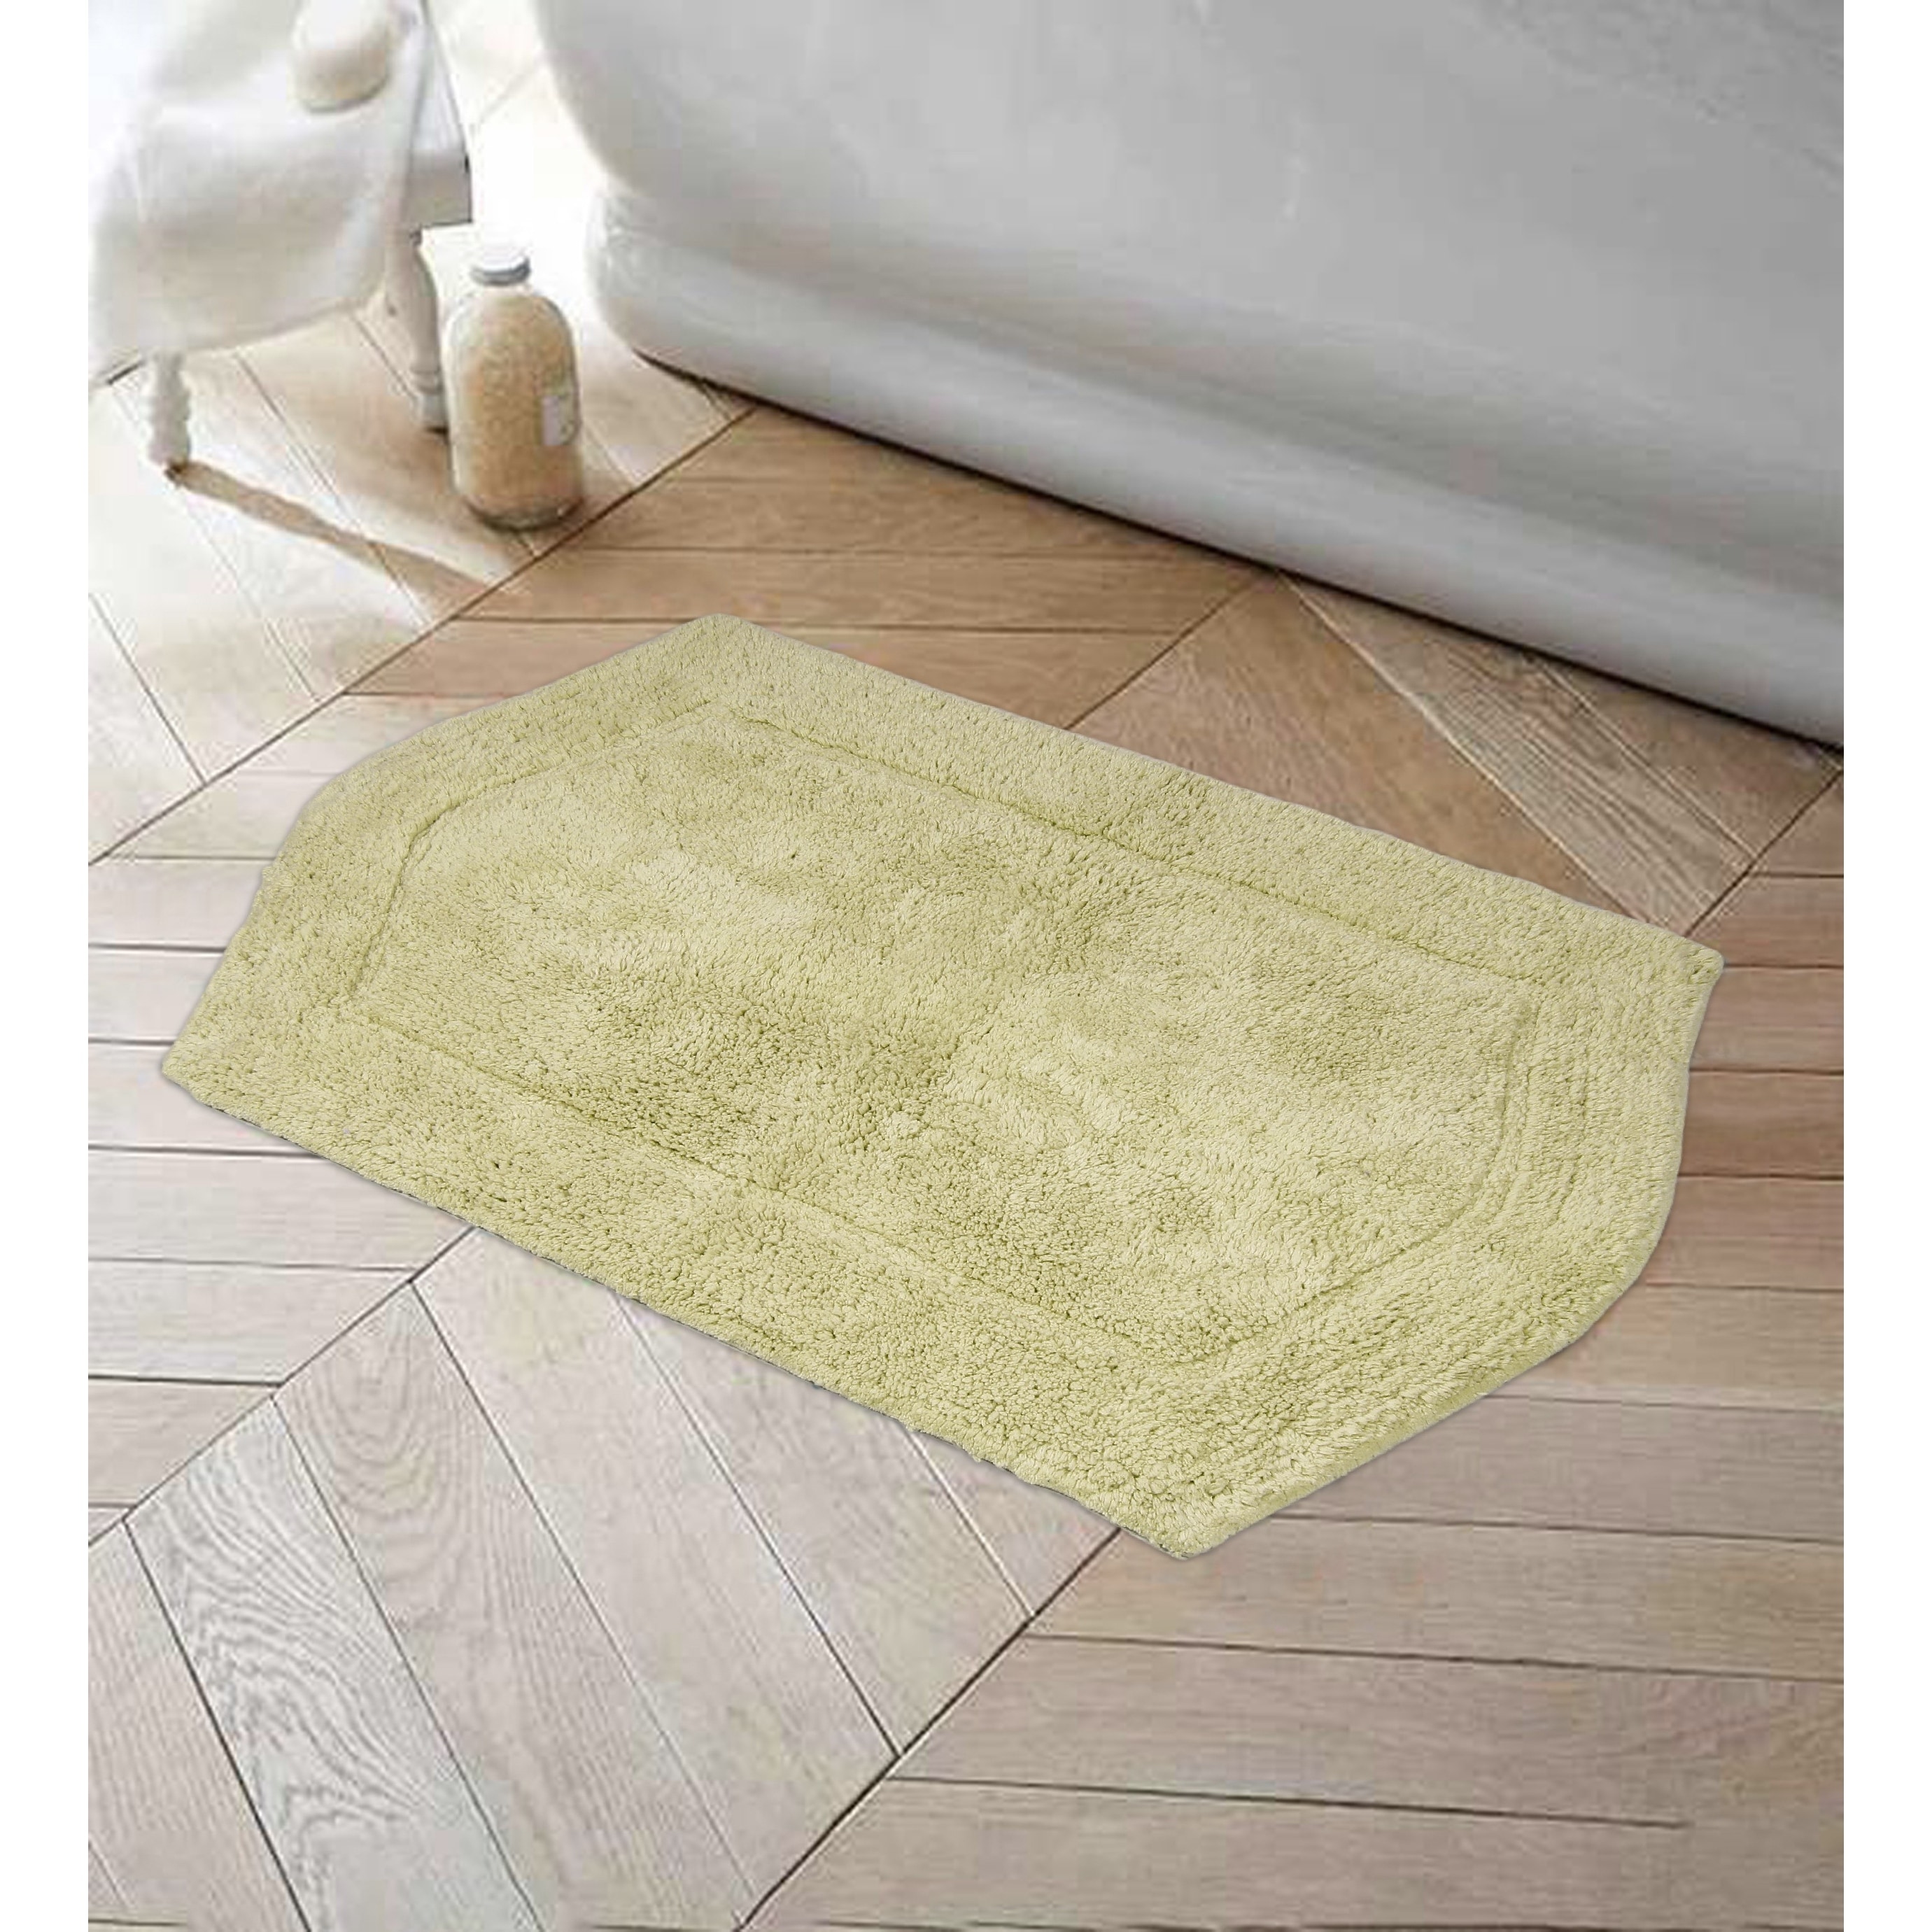 https://ak1.ostkcdn.com/images/products/is/images/direct/16273fef2290f76c6bf68e1d4e26cd0e9ee4f772/Home-Weavers-Waterford-Collection-Bath-Rugs-Cotton-Soft-and-Absorbent-Non-Slip-Bath-Mats-Machine-Washable-bath-rugs-21%22x34%22.jpg